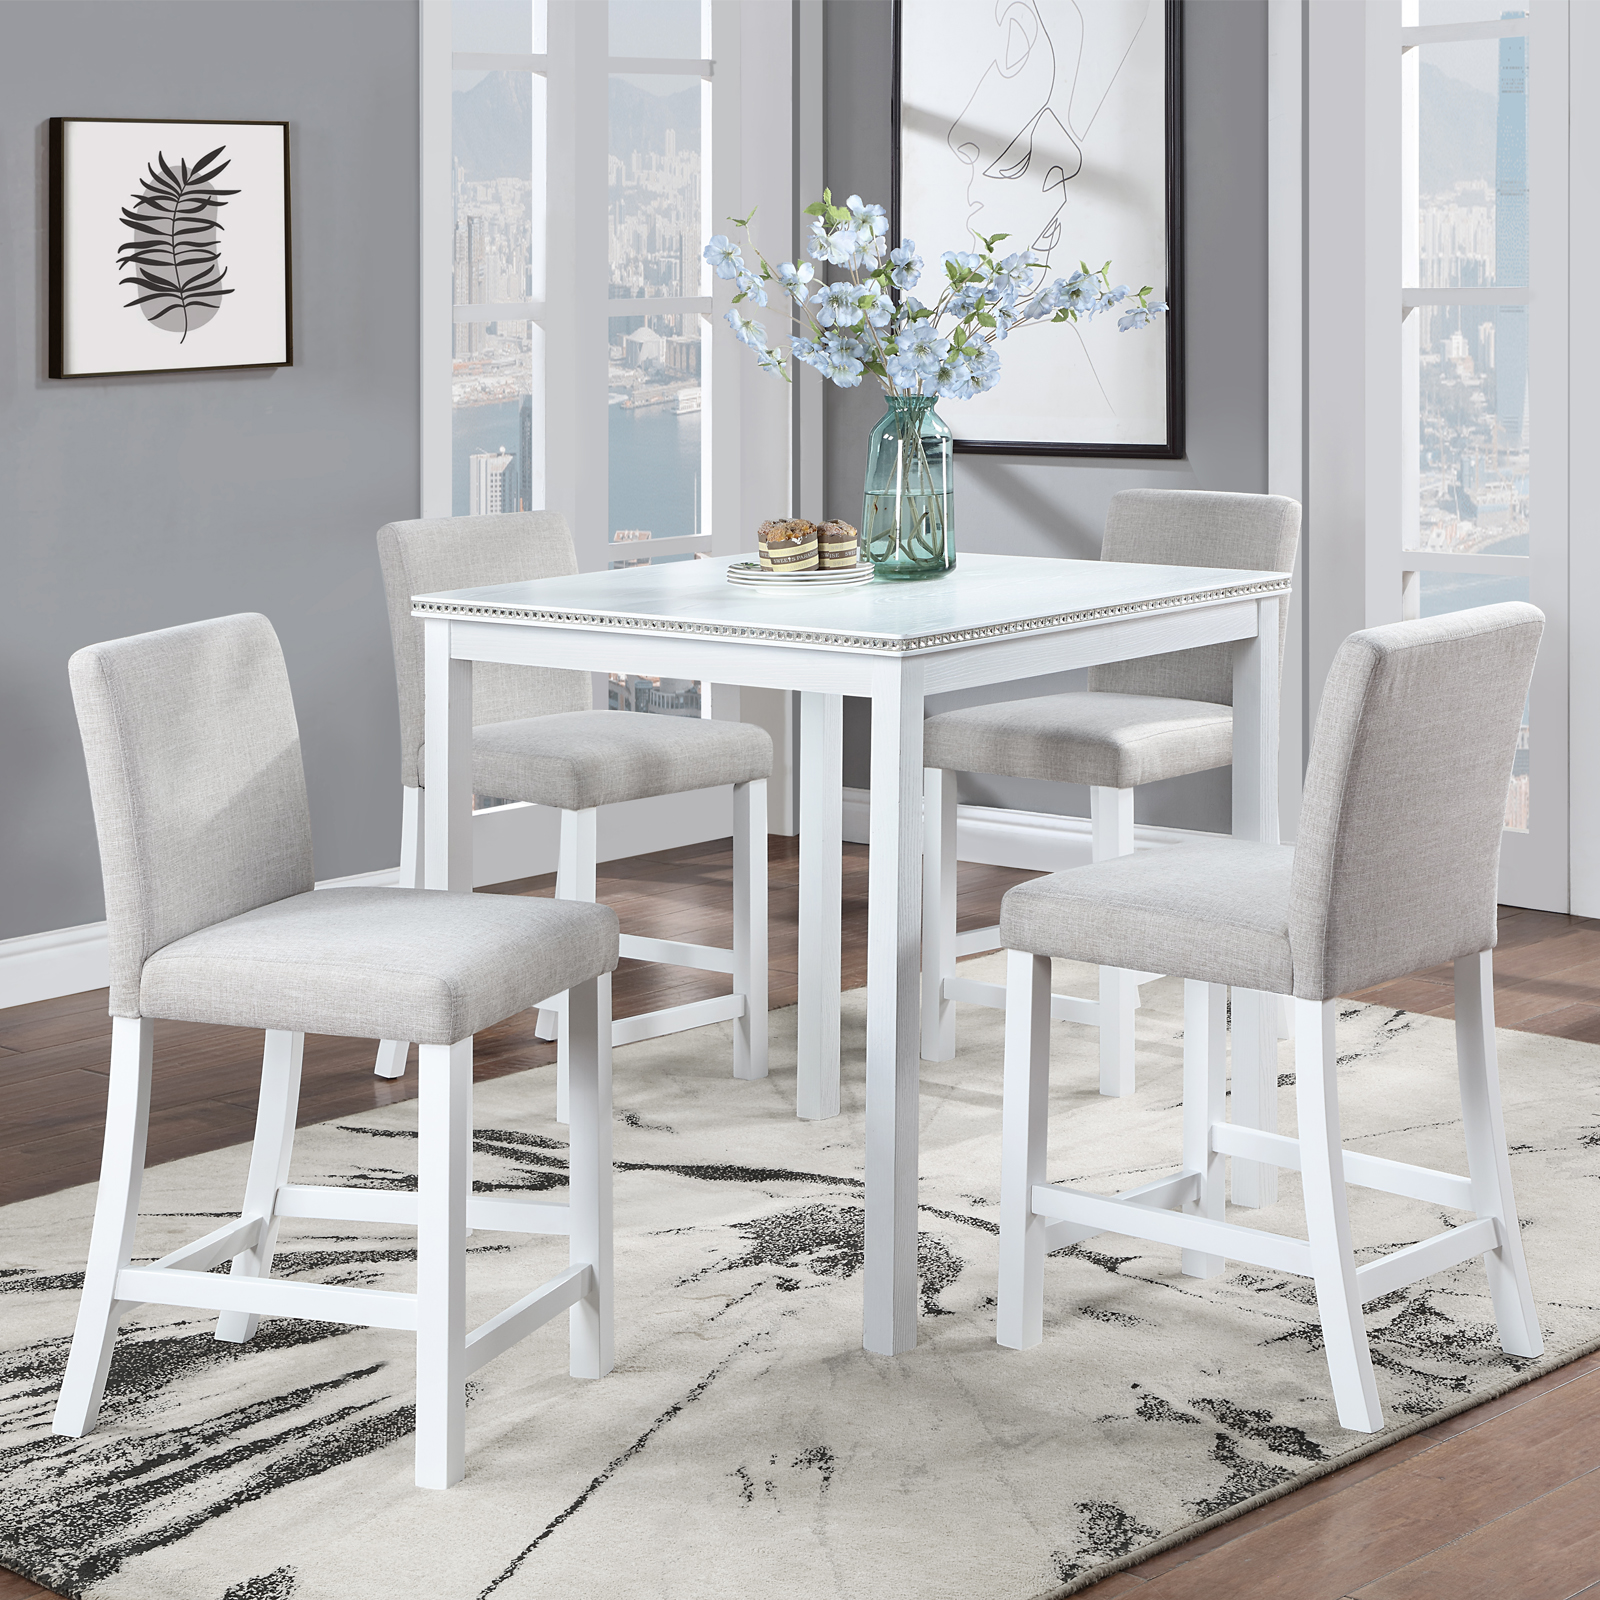 Wooden Dining Square Table, Kitchen Table for Small Space, 4 Person Counter Height Table, White 